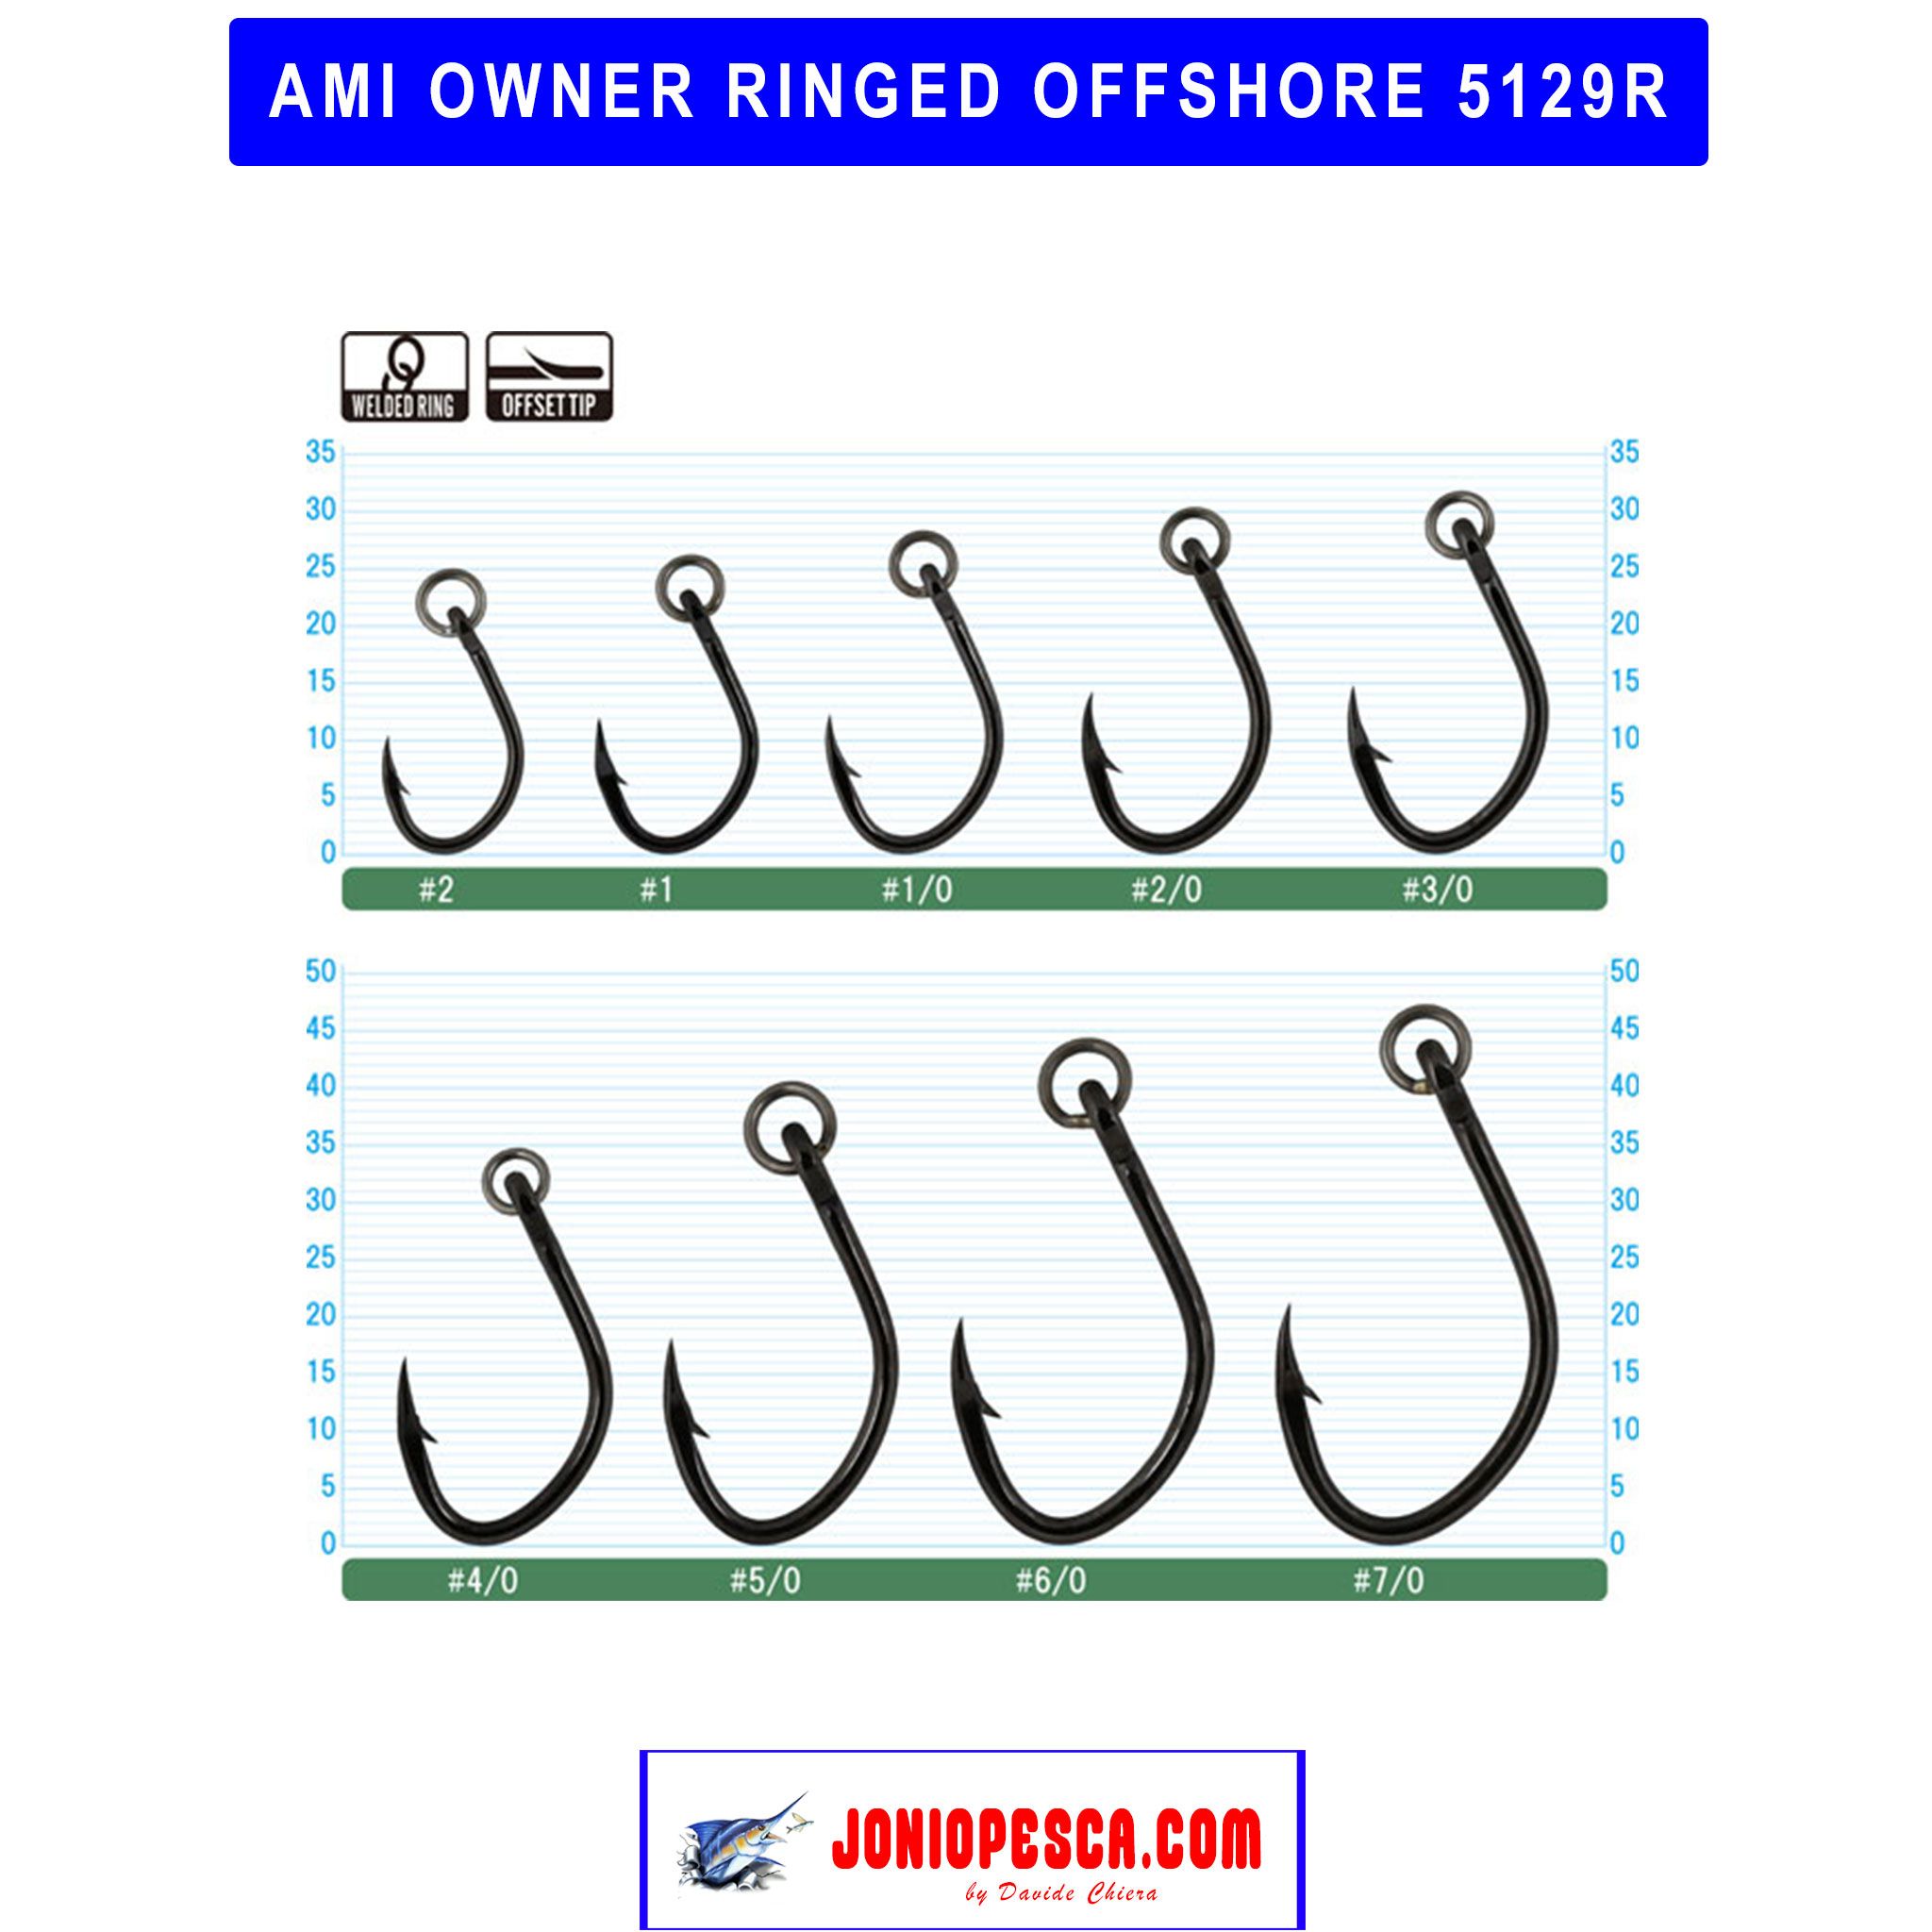 ami-owner-ringed-offshore-5129r-1